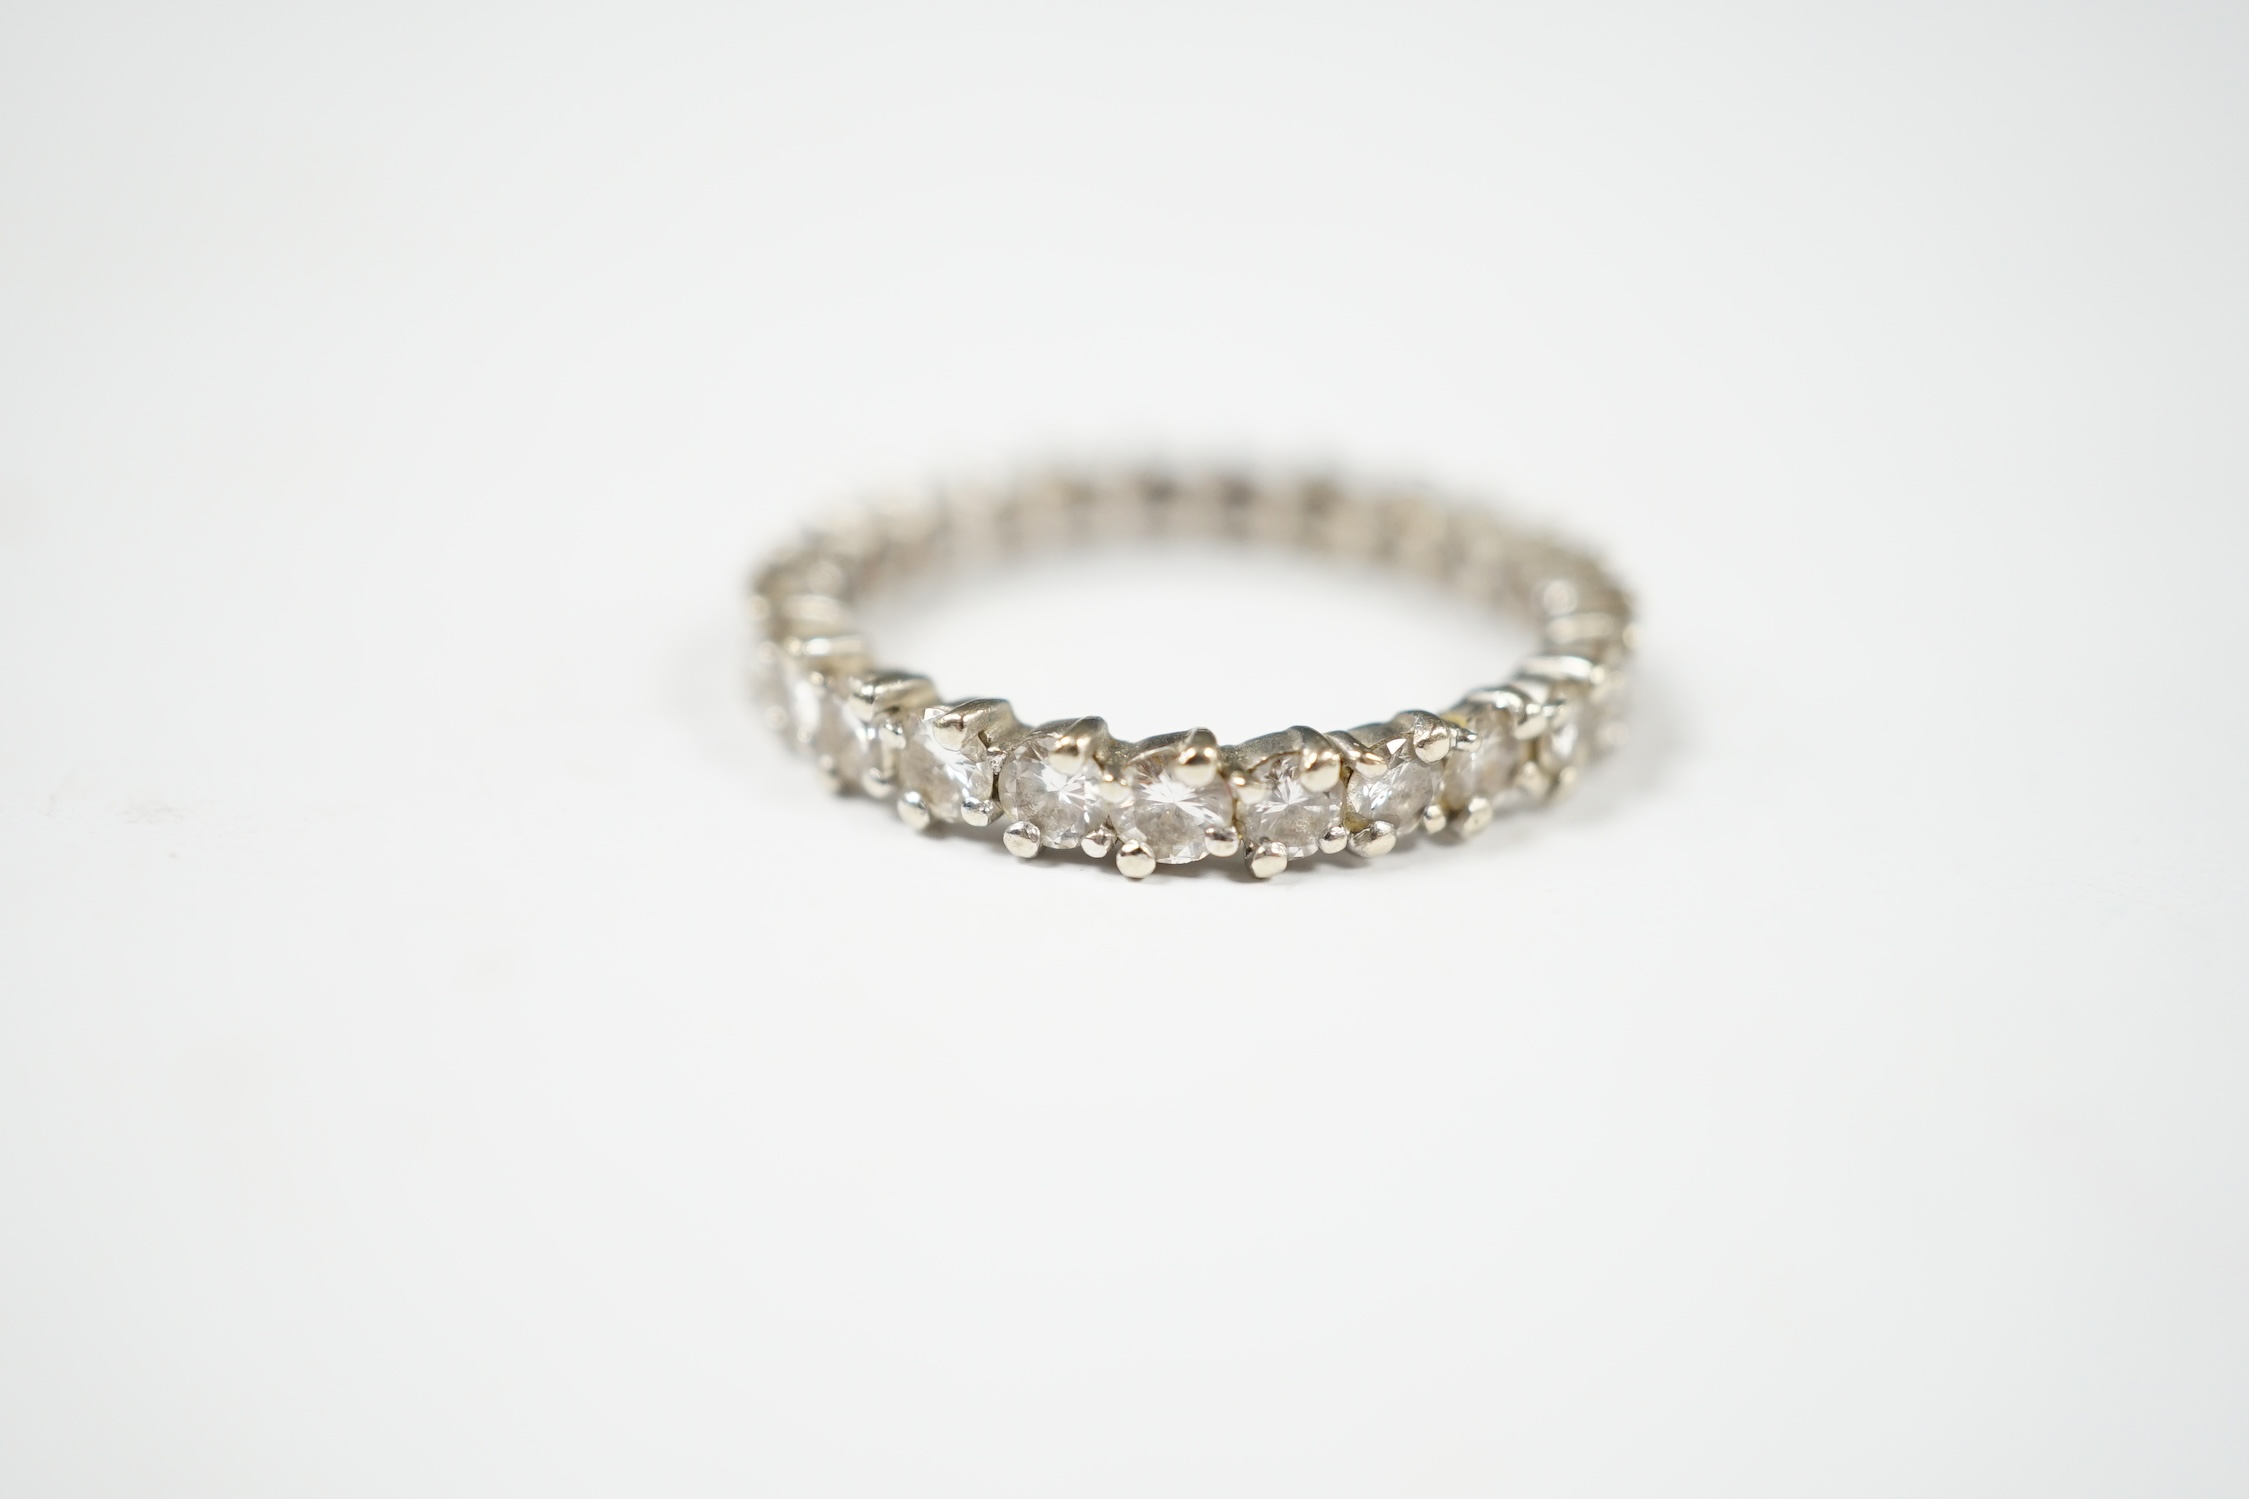 An early 20th century French 18k white gold and diamond set full eternity ring, size Q, gross weight 2.9 grams (stone missing). Condition - poor to fair